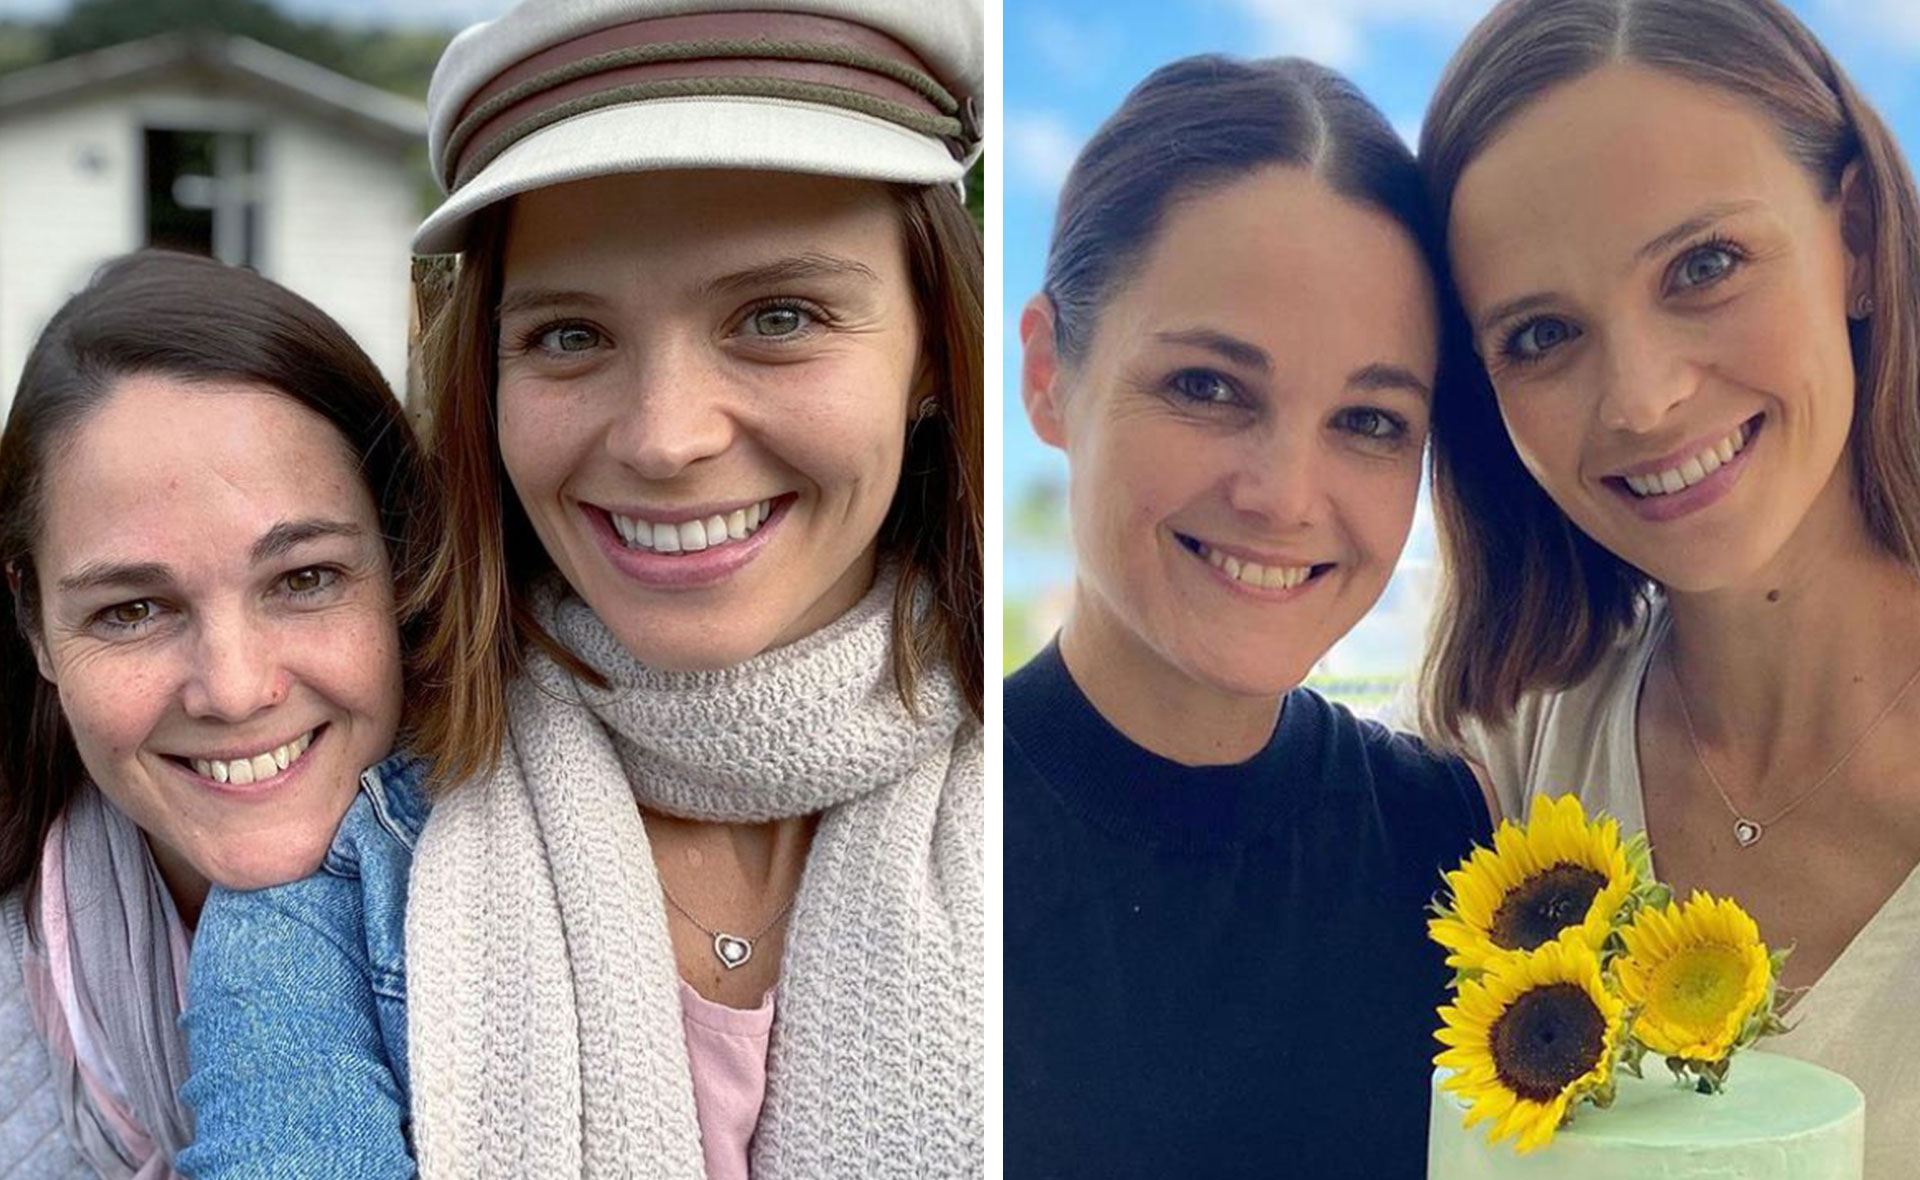 ”Sandra was strong and graceful”: Lauren Brant announces the heartbreaking death of her sister-in-law following battle with cancer